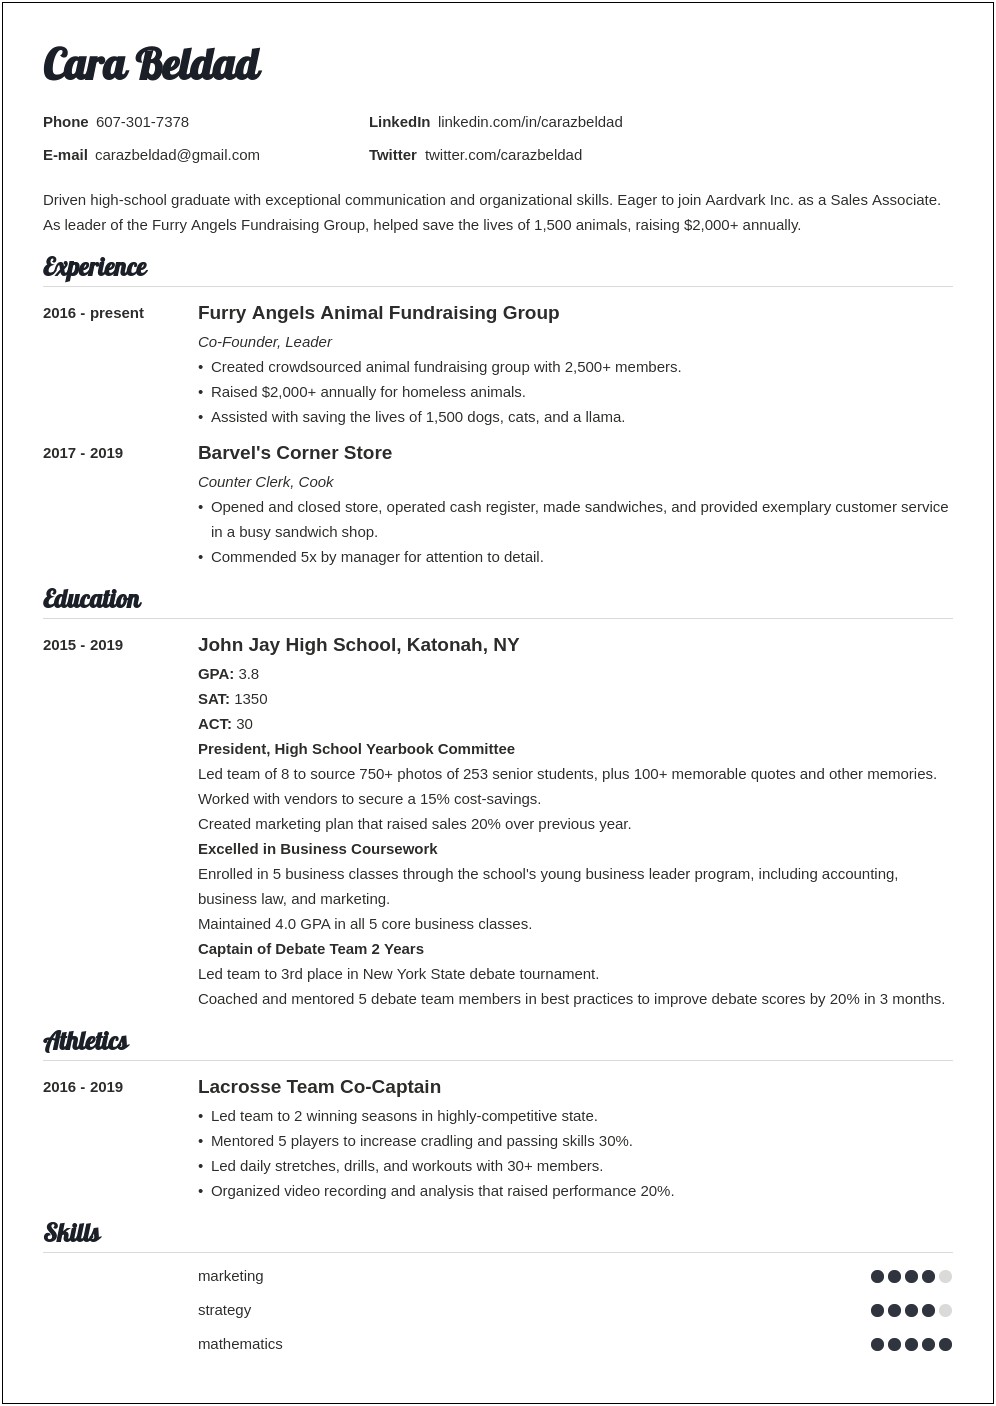 Skills Learned In High School For Resume